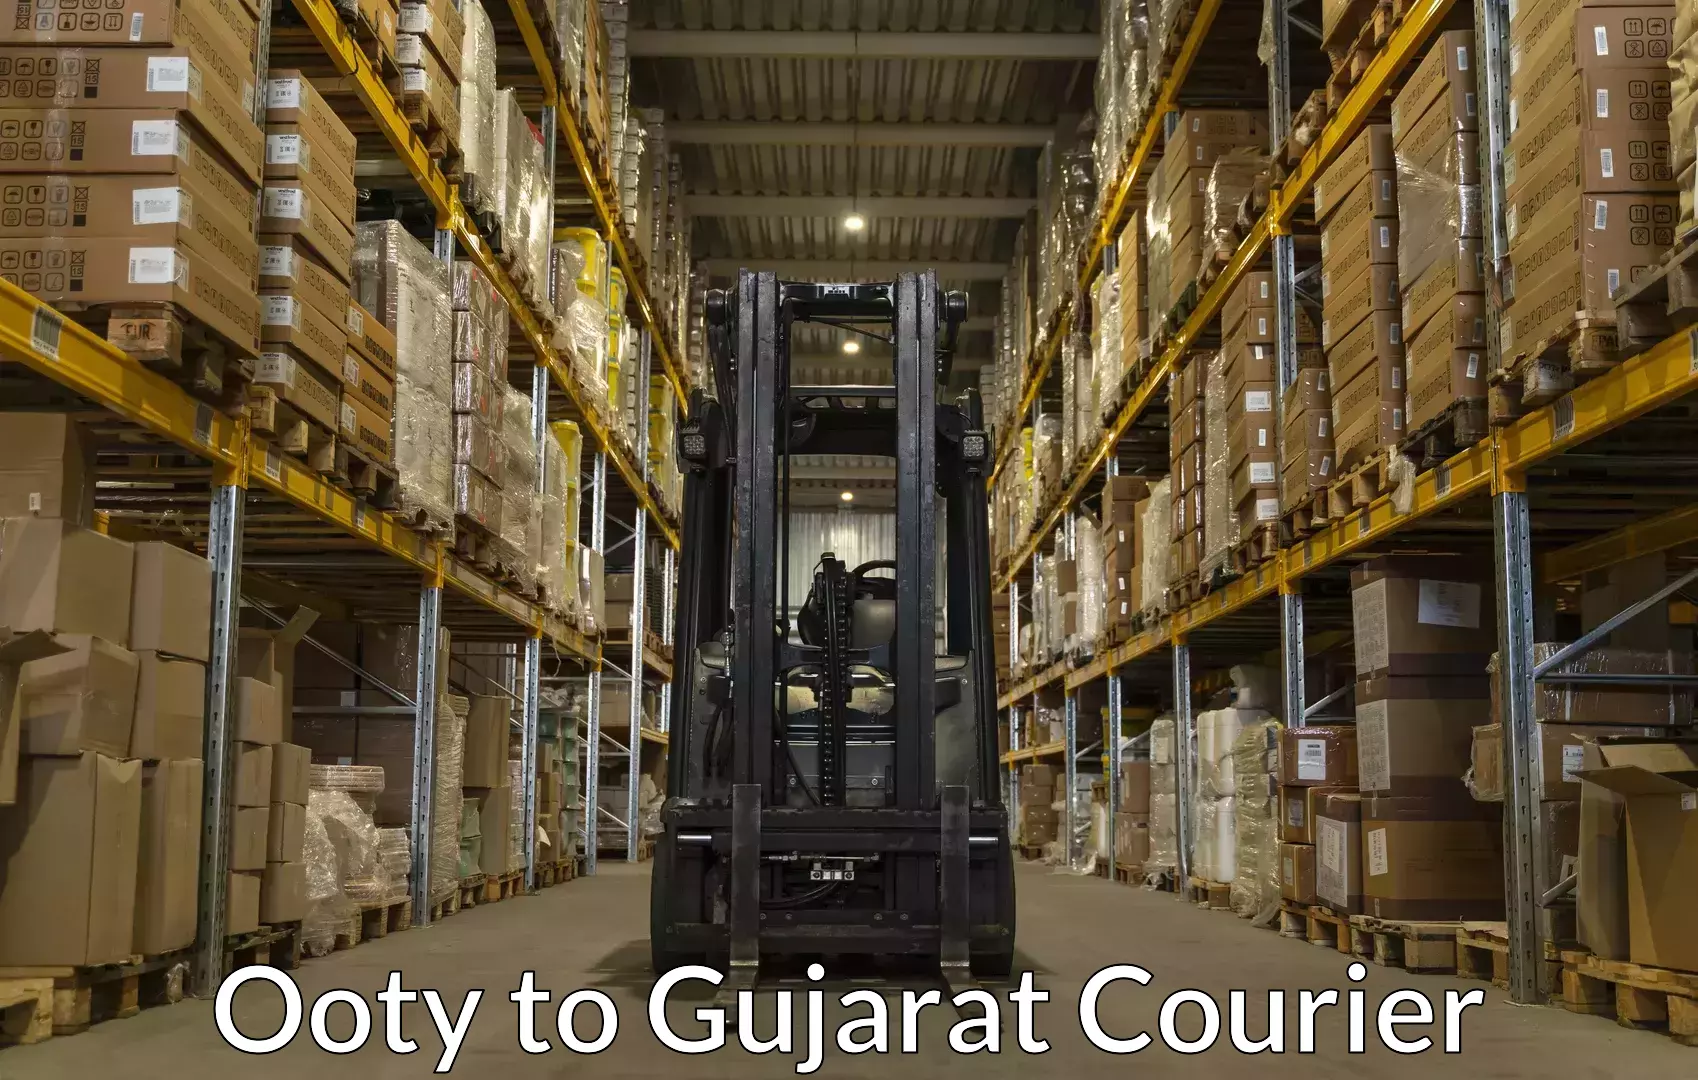 Luggage delivery network Ooty to Gujarat